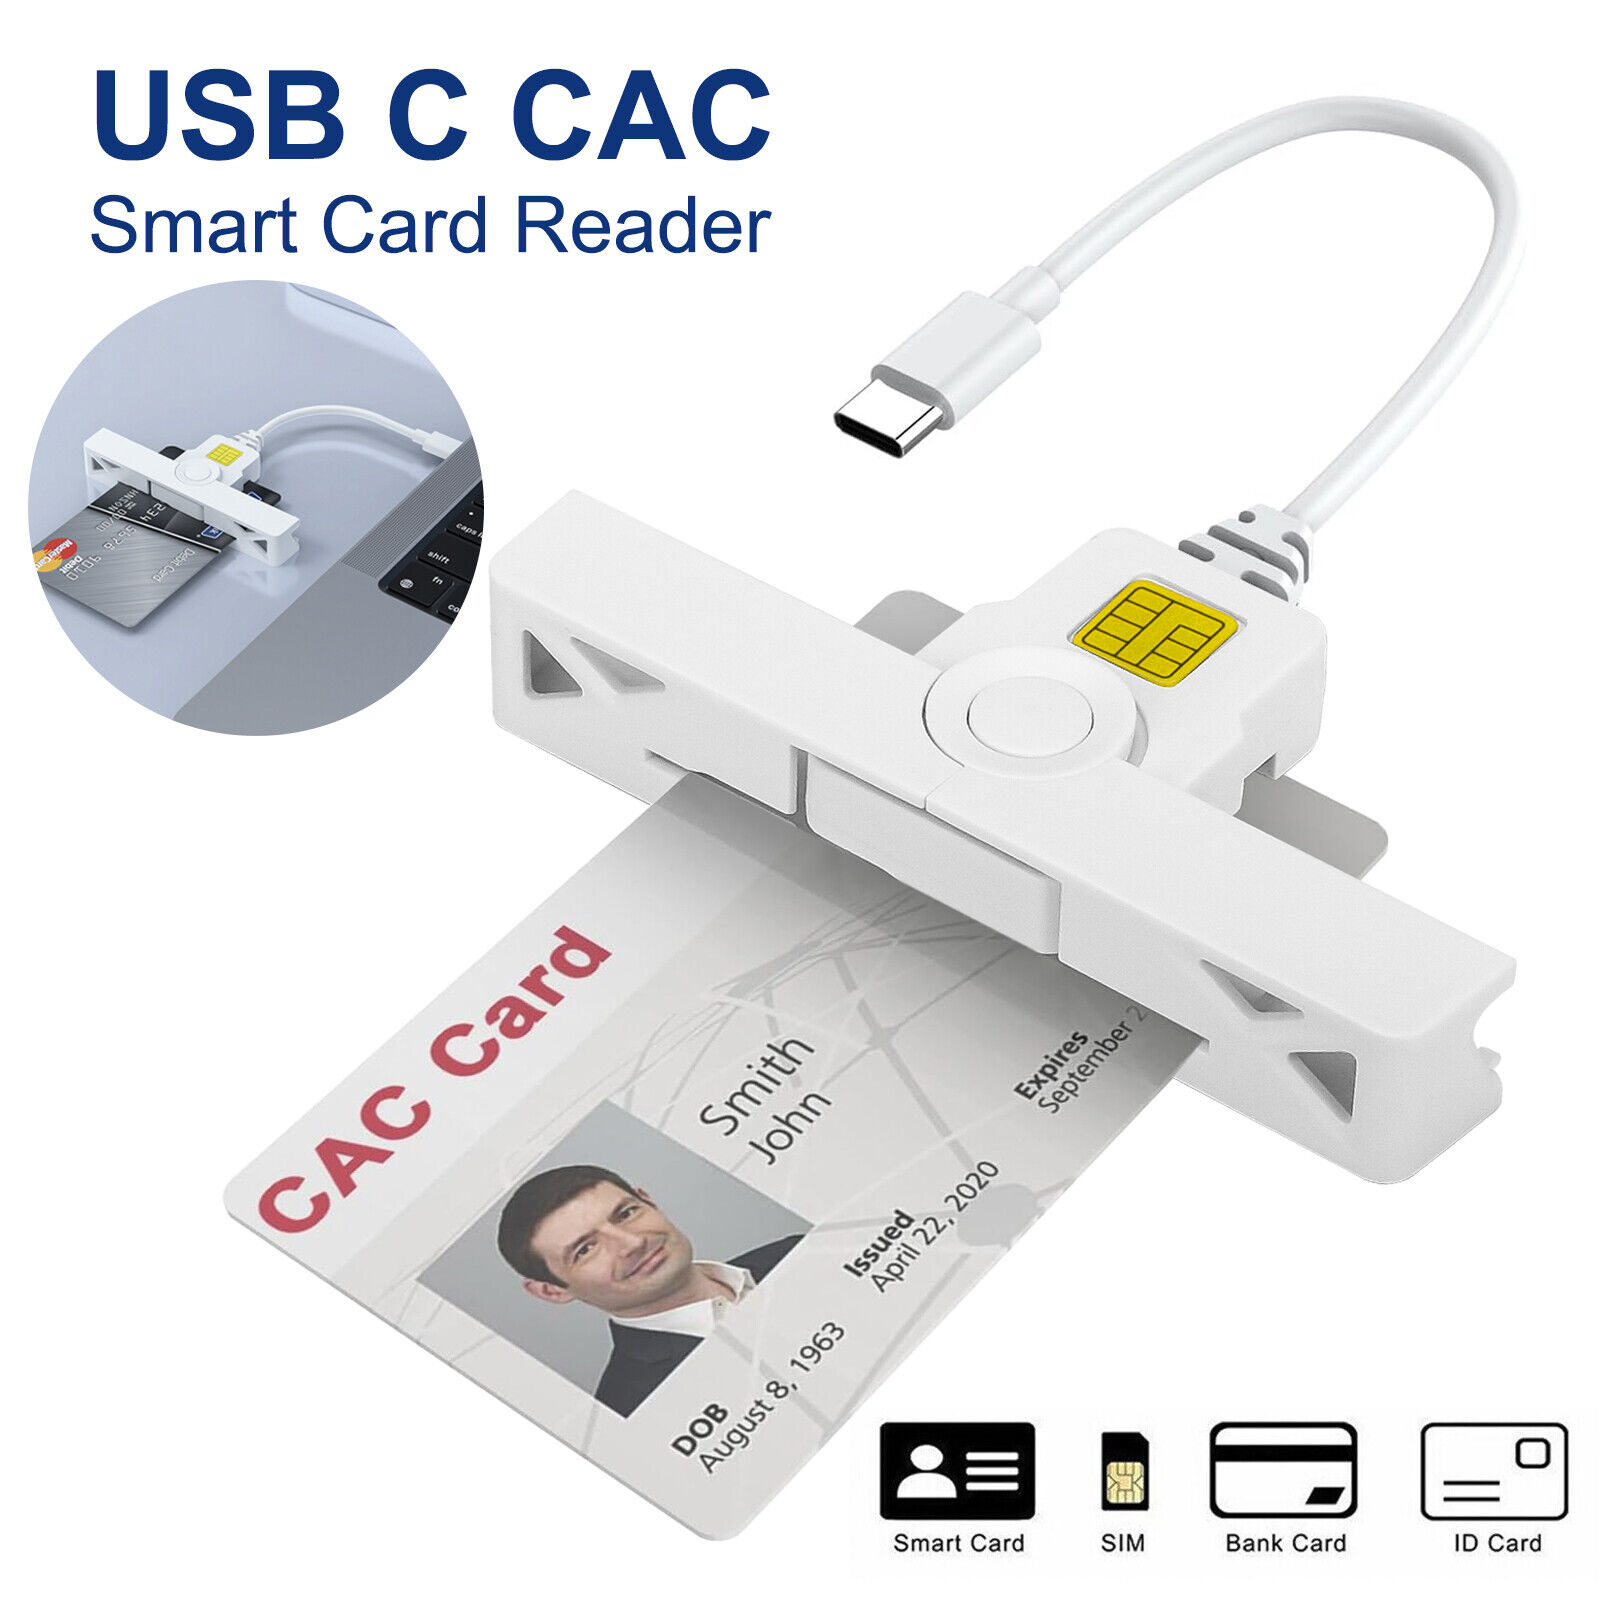 Type C DOD Military USB C Common Access CAC Card Reader for Windows Mac OS Linux